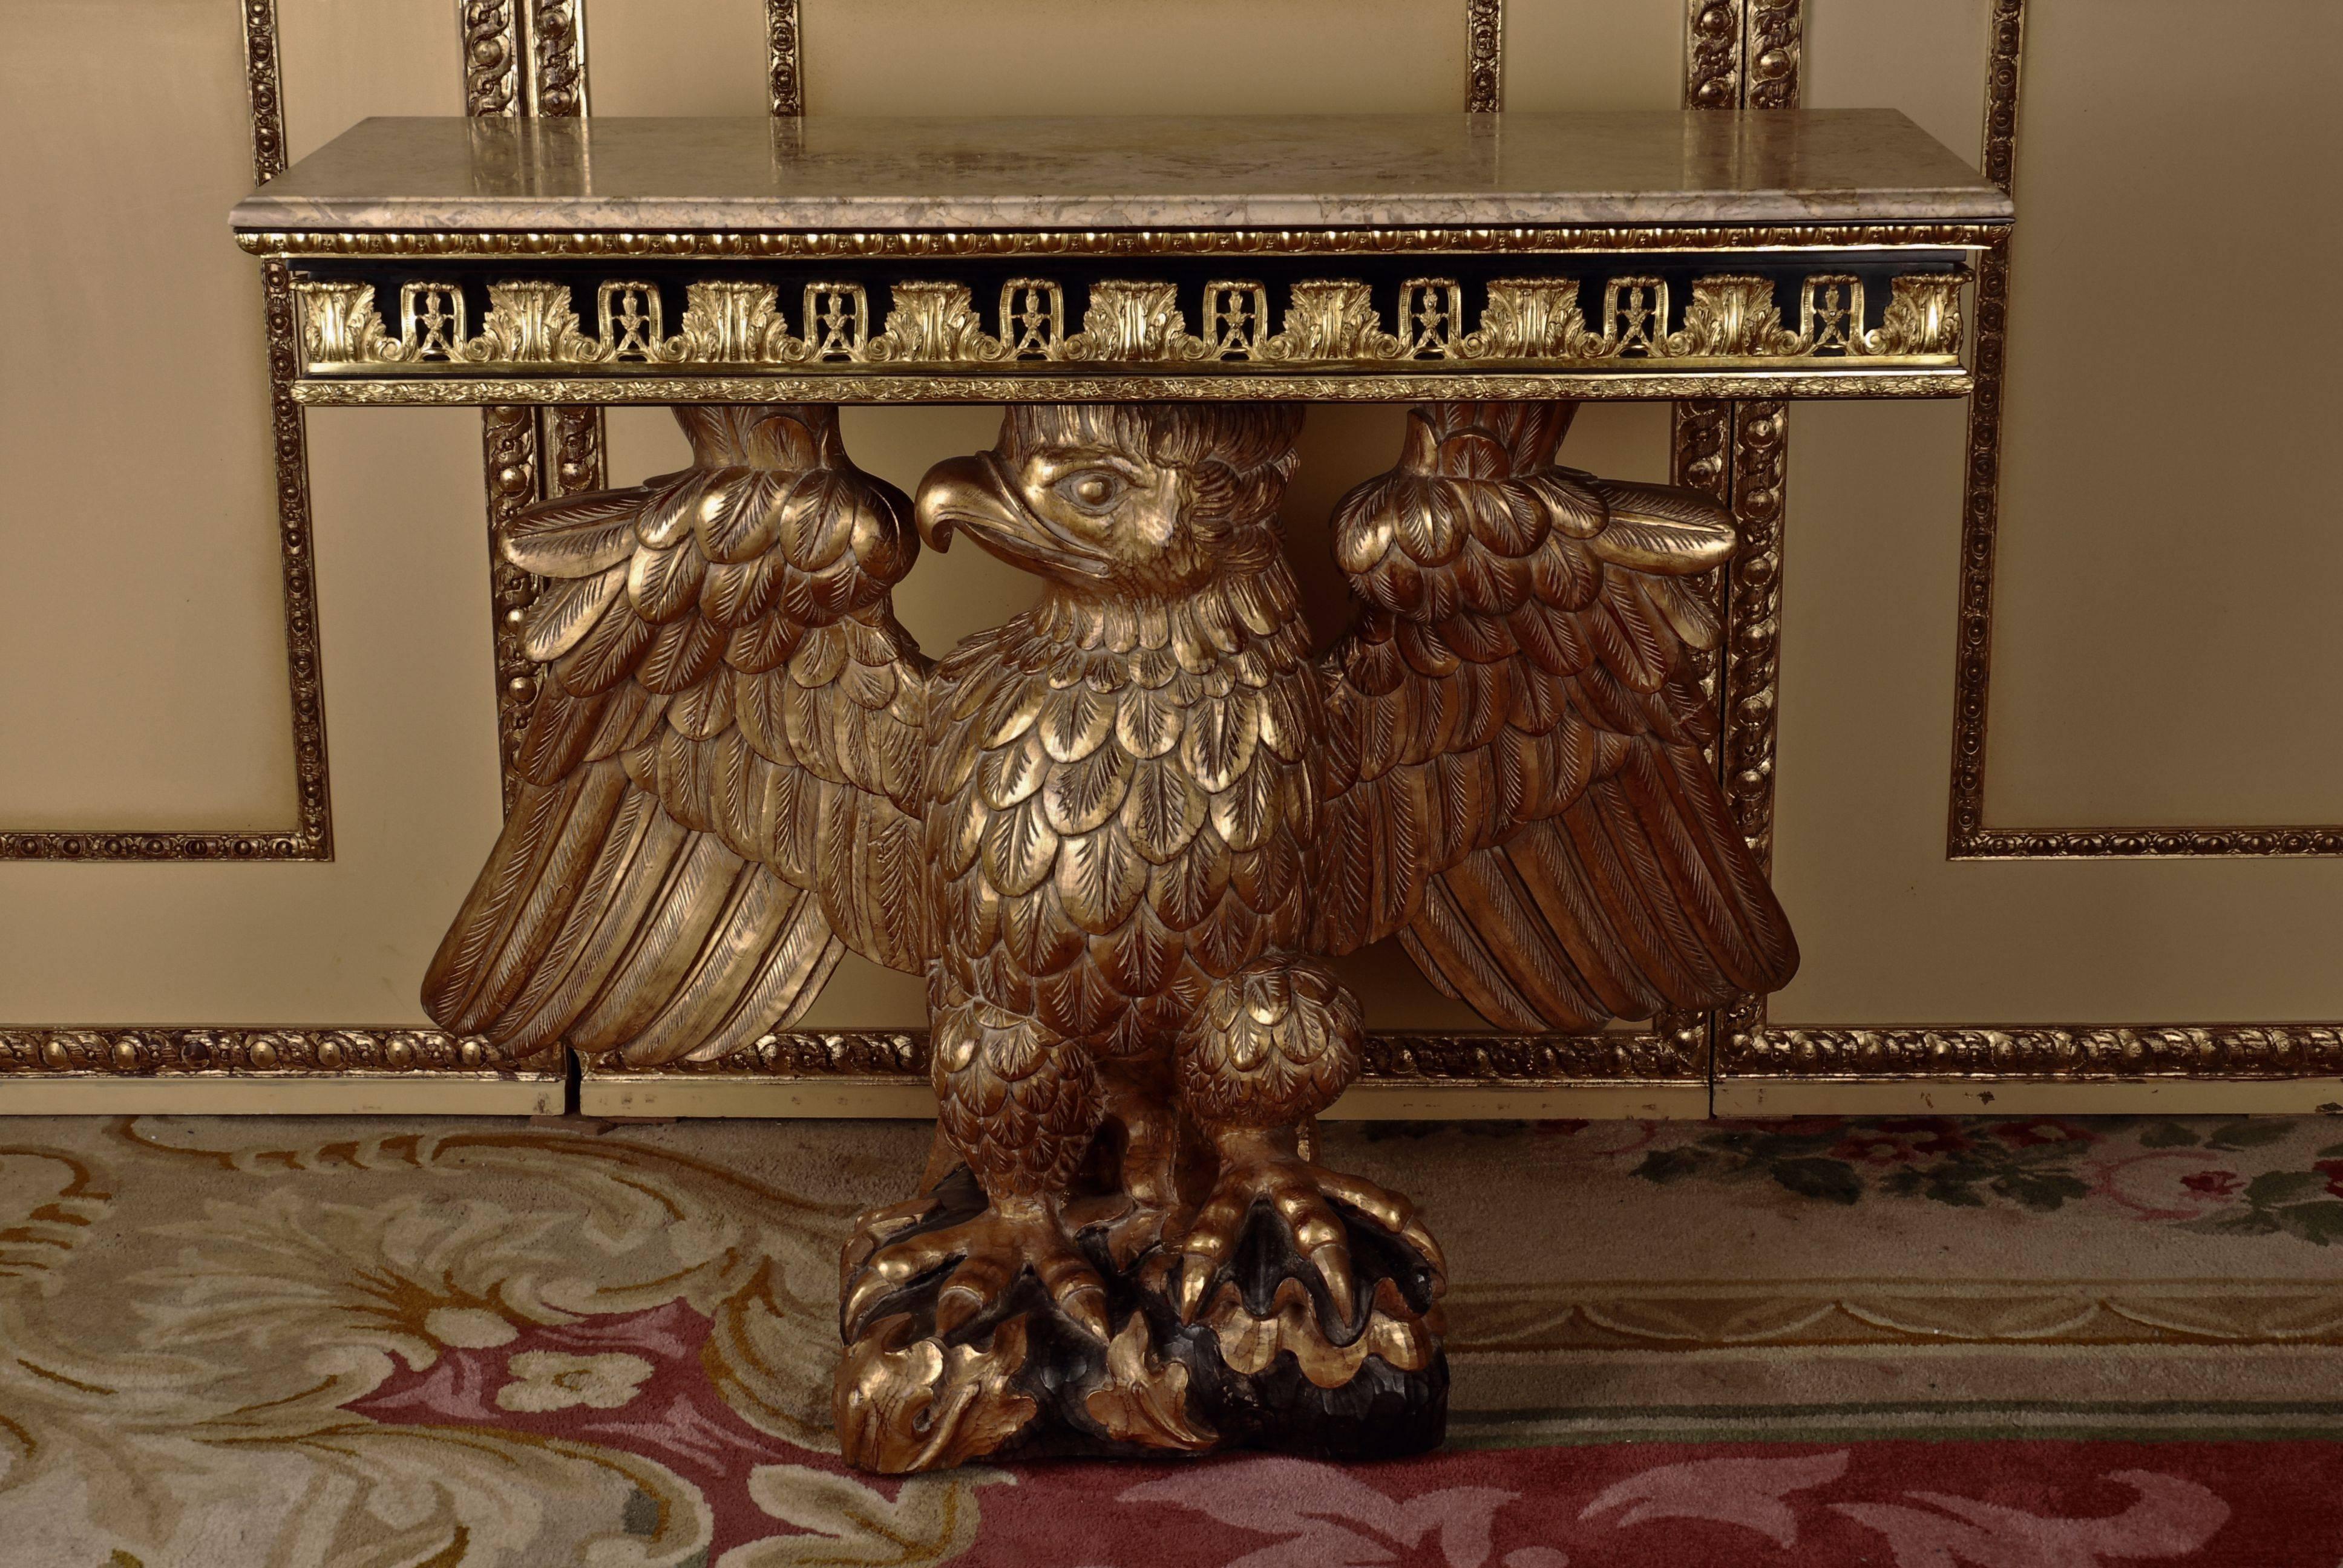 Imposing eagle console after a model by William Kent, 1685-1748.
A console from the Regency period, approximately. Monumental fully moulded hand-carved eagles from solid Beech. Partial black hand-painted and gilded. Standing on a slab. Frieze of